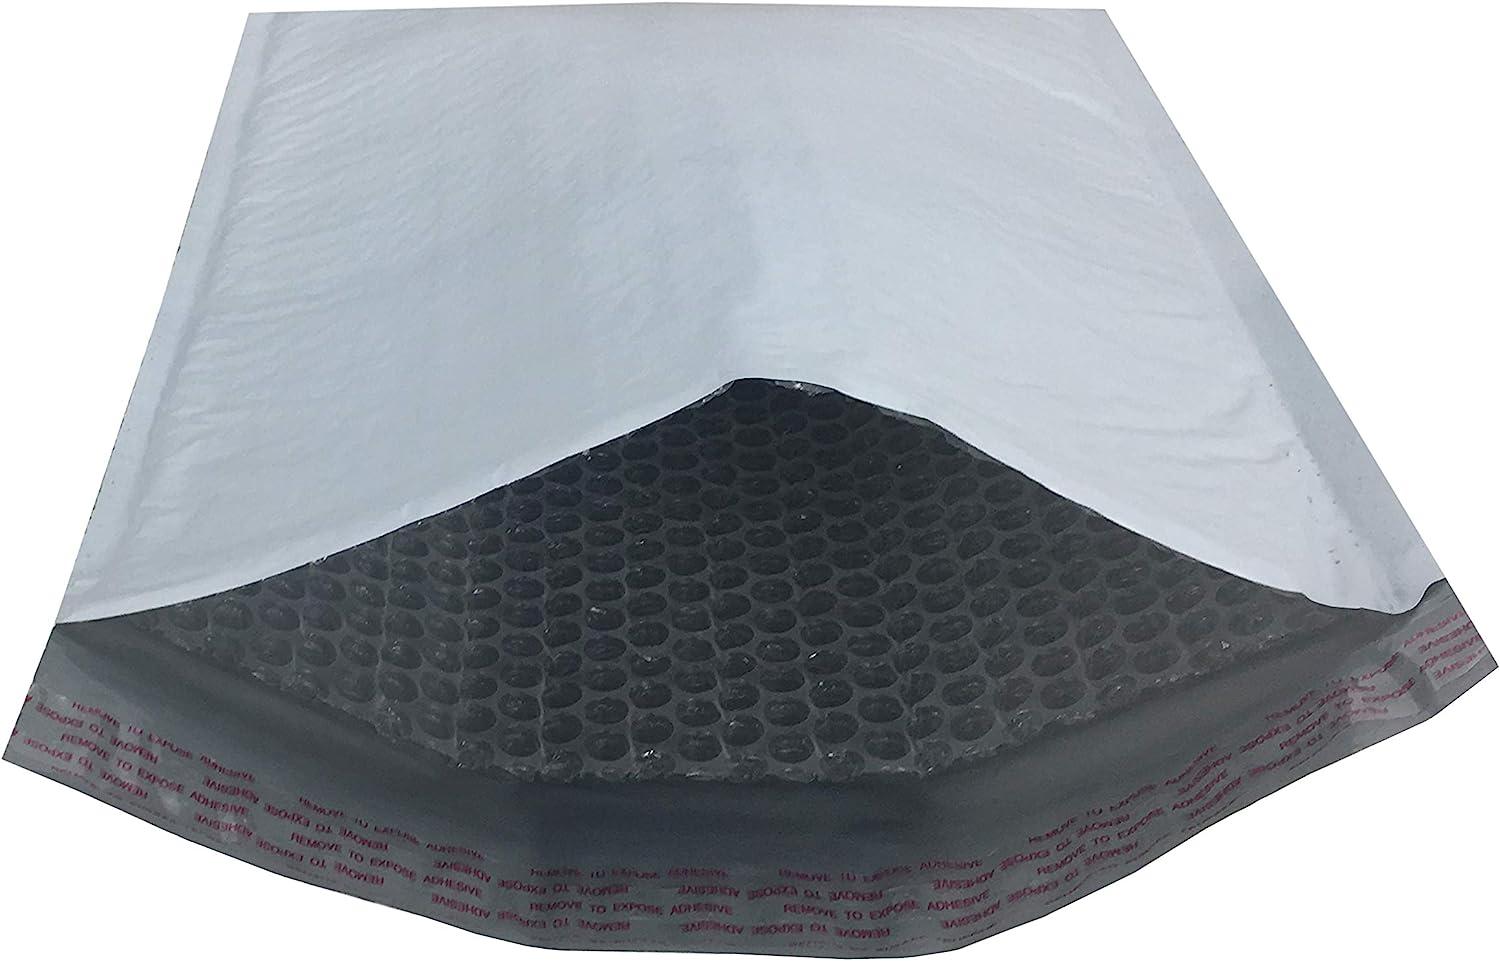 Amazon Basics Self-Seal Poly Bubble Mailers 25 Pack for $4.70 Shipped